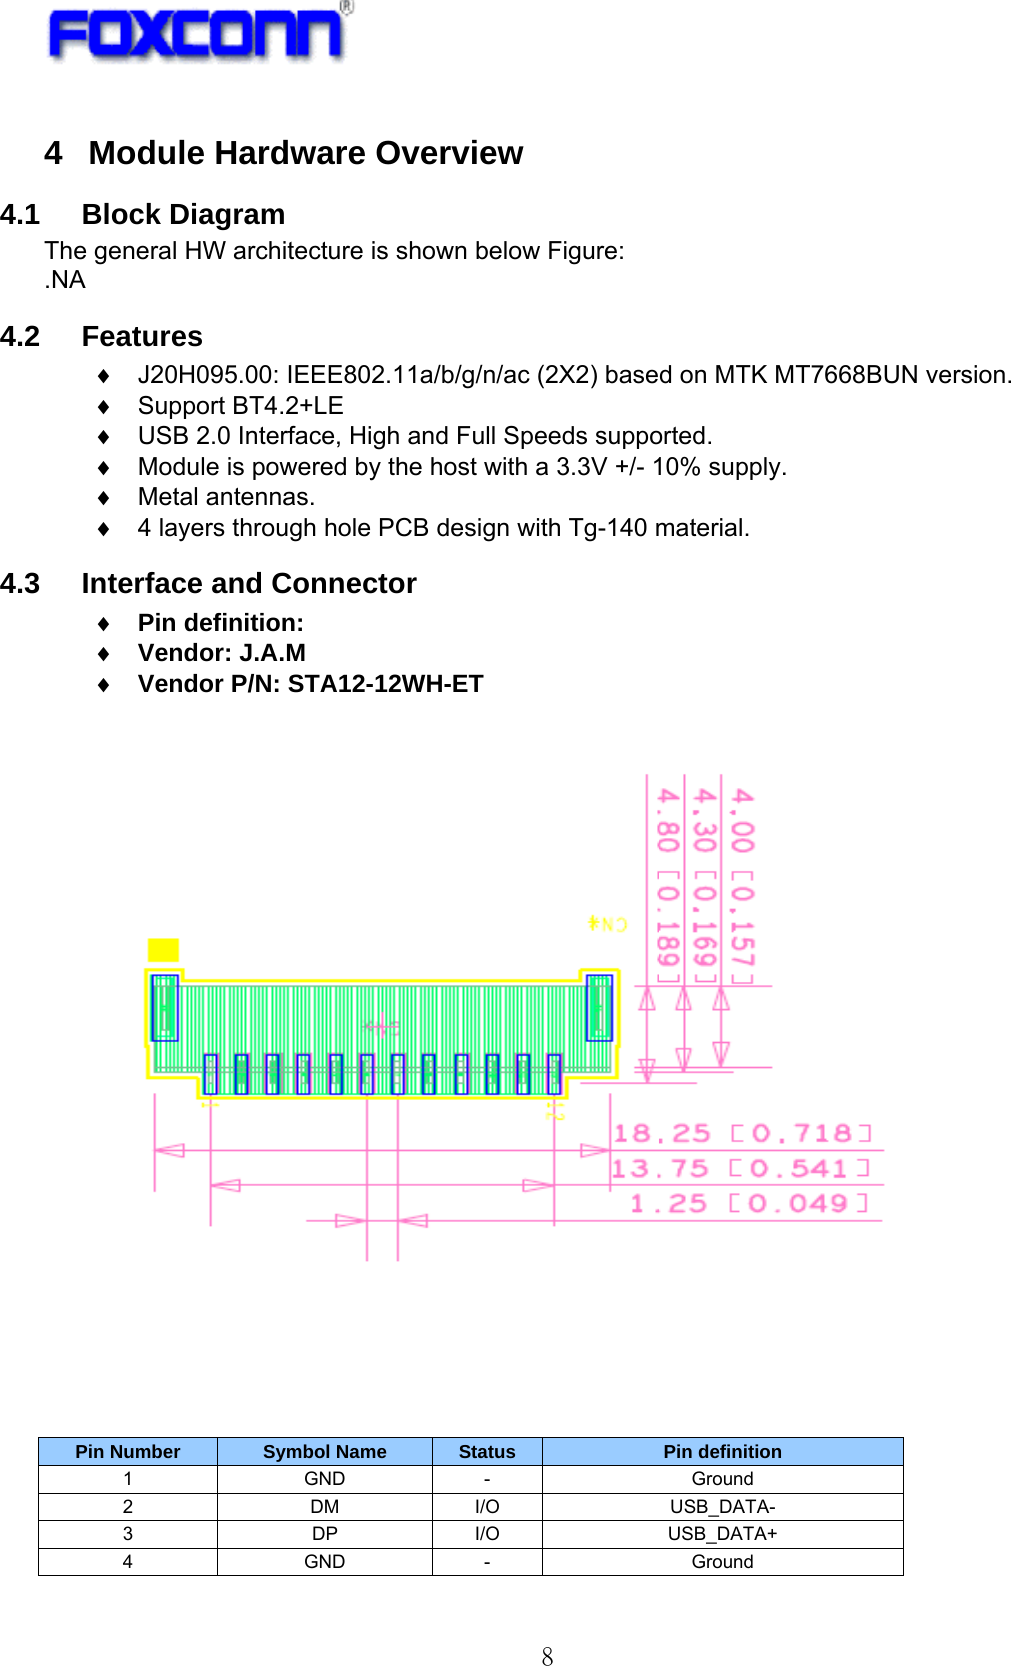   8 4  Module Hardware Overview 4.1  Block Diagram The general HW architecture is shown below Figure: .NA 4.2  Features ♦ J20H095.00: IEEE802.11a/b/g/n/ac (2X2) based on MTK MT7668BUN version. ♦ Support BT4.2+LE ♦  USB 2.0 Interface, High and Full Speeds supported. ♦  Module is powered by the host with a 3.3V +/- 10% supply. ♦ Metal antennas. ♦  4 layers through hole PCB design with Tg-140 material. 4.3  Interface and Connector ♦ Pin definition:   ♦ Vendor: J.A.M ♦ Vendor P/N: STA12-12WH-ET      Pin Number  Symbol Name  Status  Pin definition 1 GND -  Ground 2 DM I/O USB_DATA- 3 DP I/O USB_DATA+ 4 GND -  Ground 